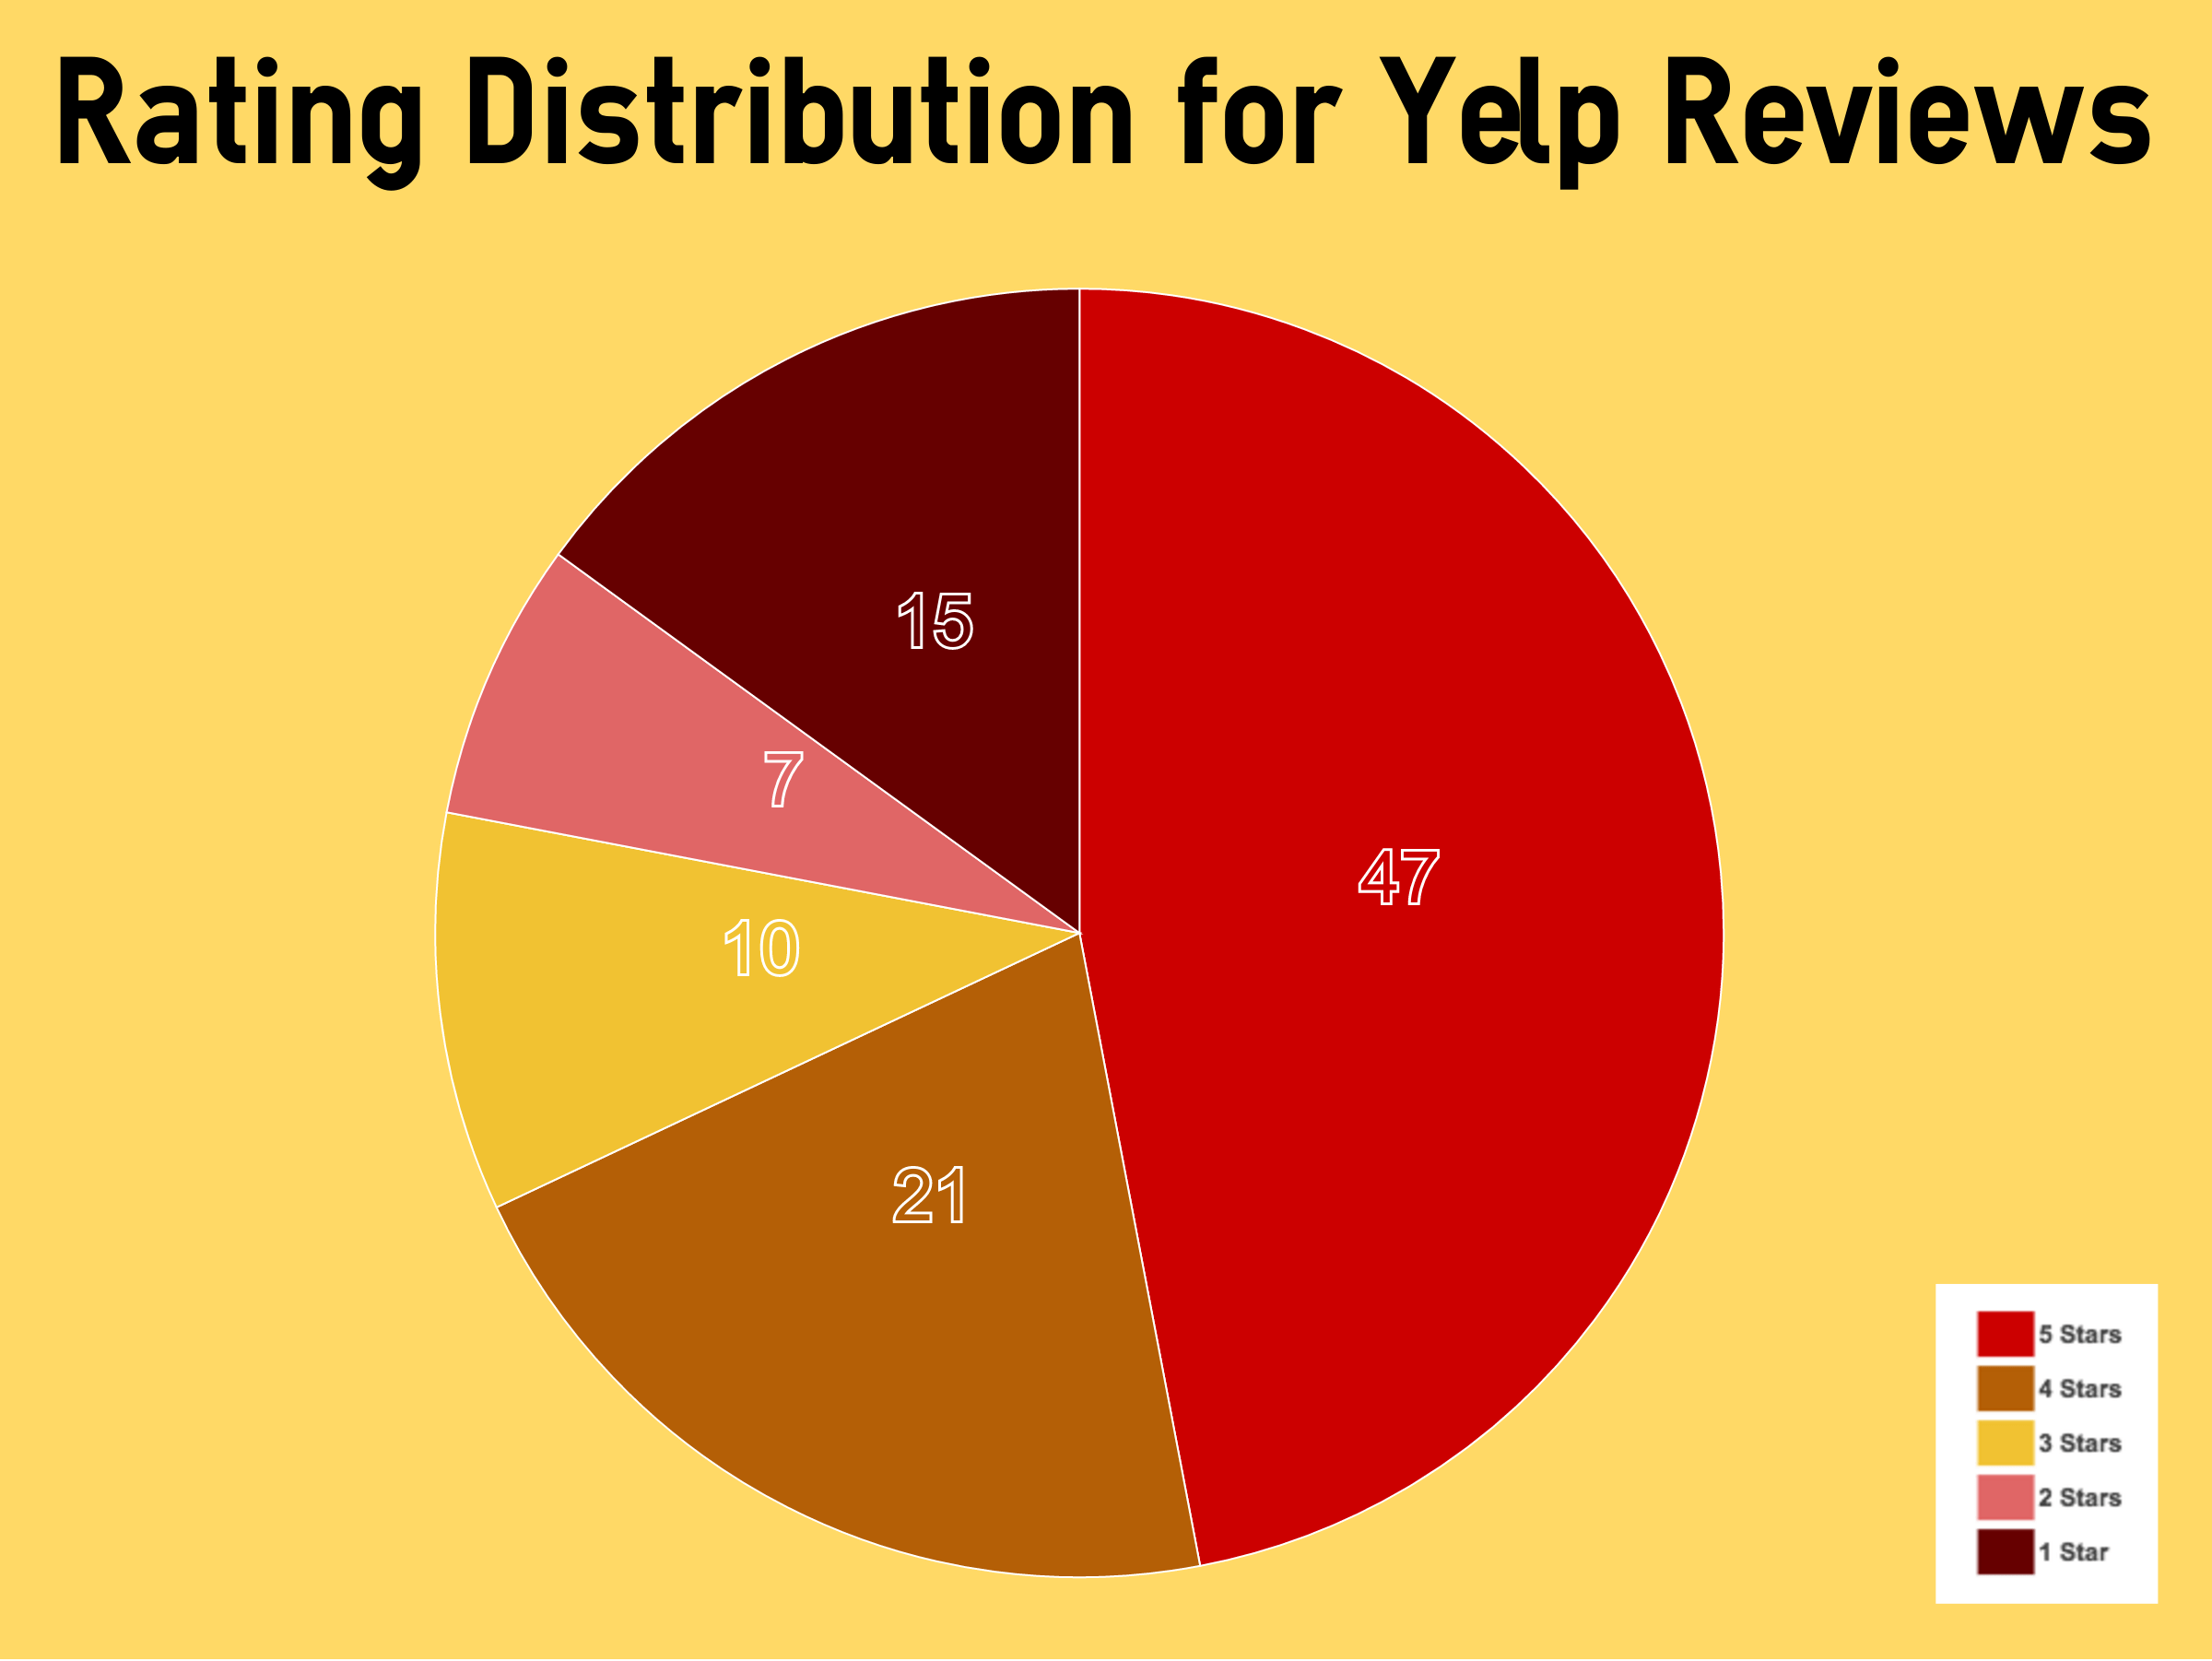 Red 5 Stars Yelp Review Logo - How to Handle 1-Star Reviews